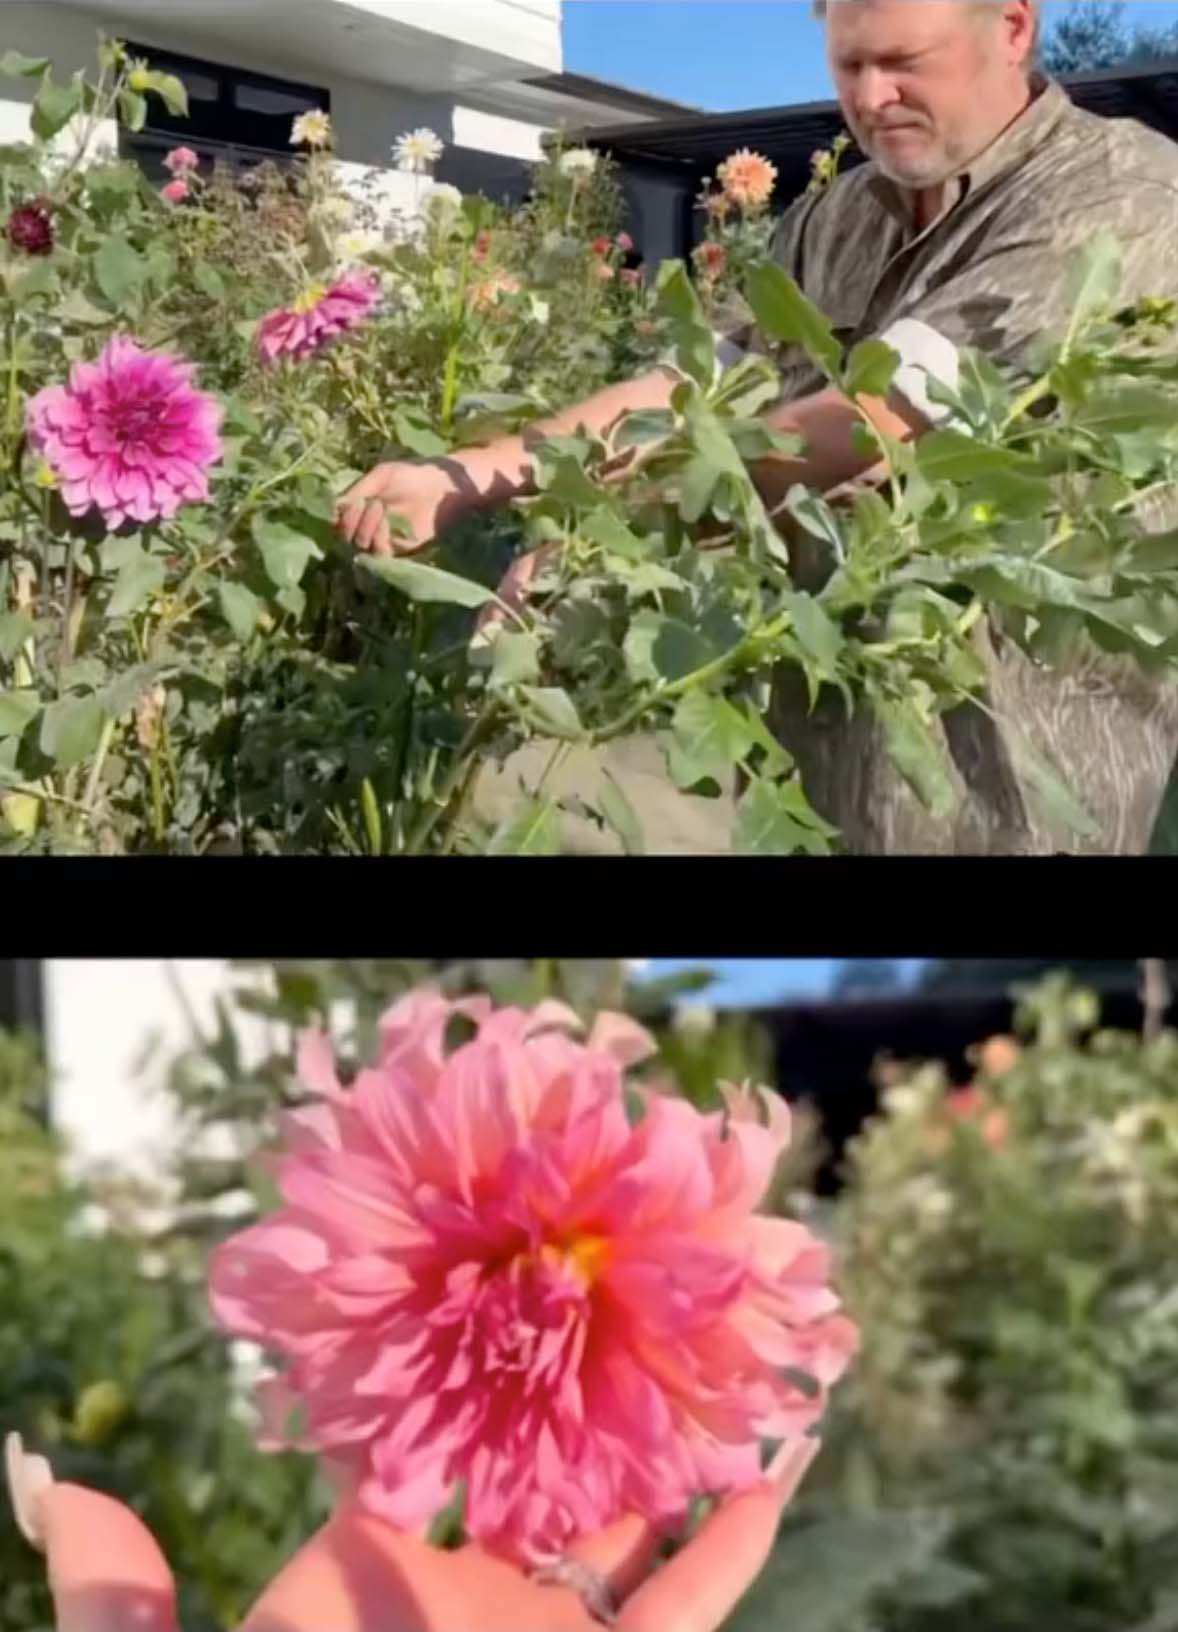 Blake appeared very briefly in Gwen's gardening clip